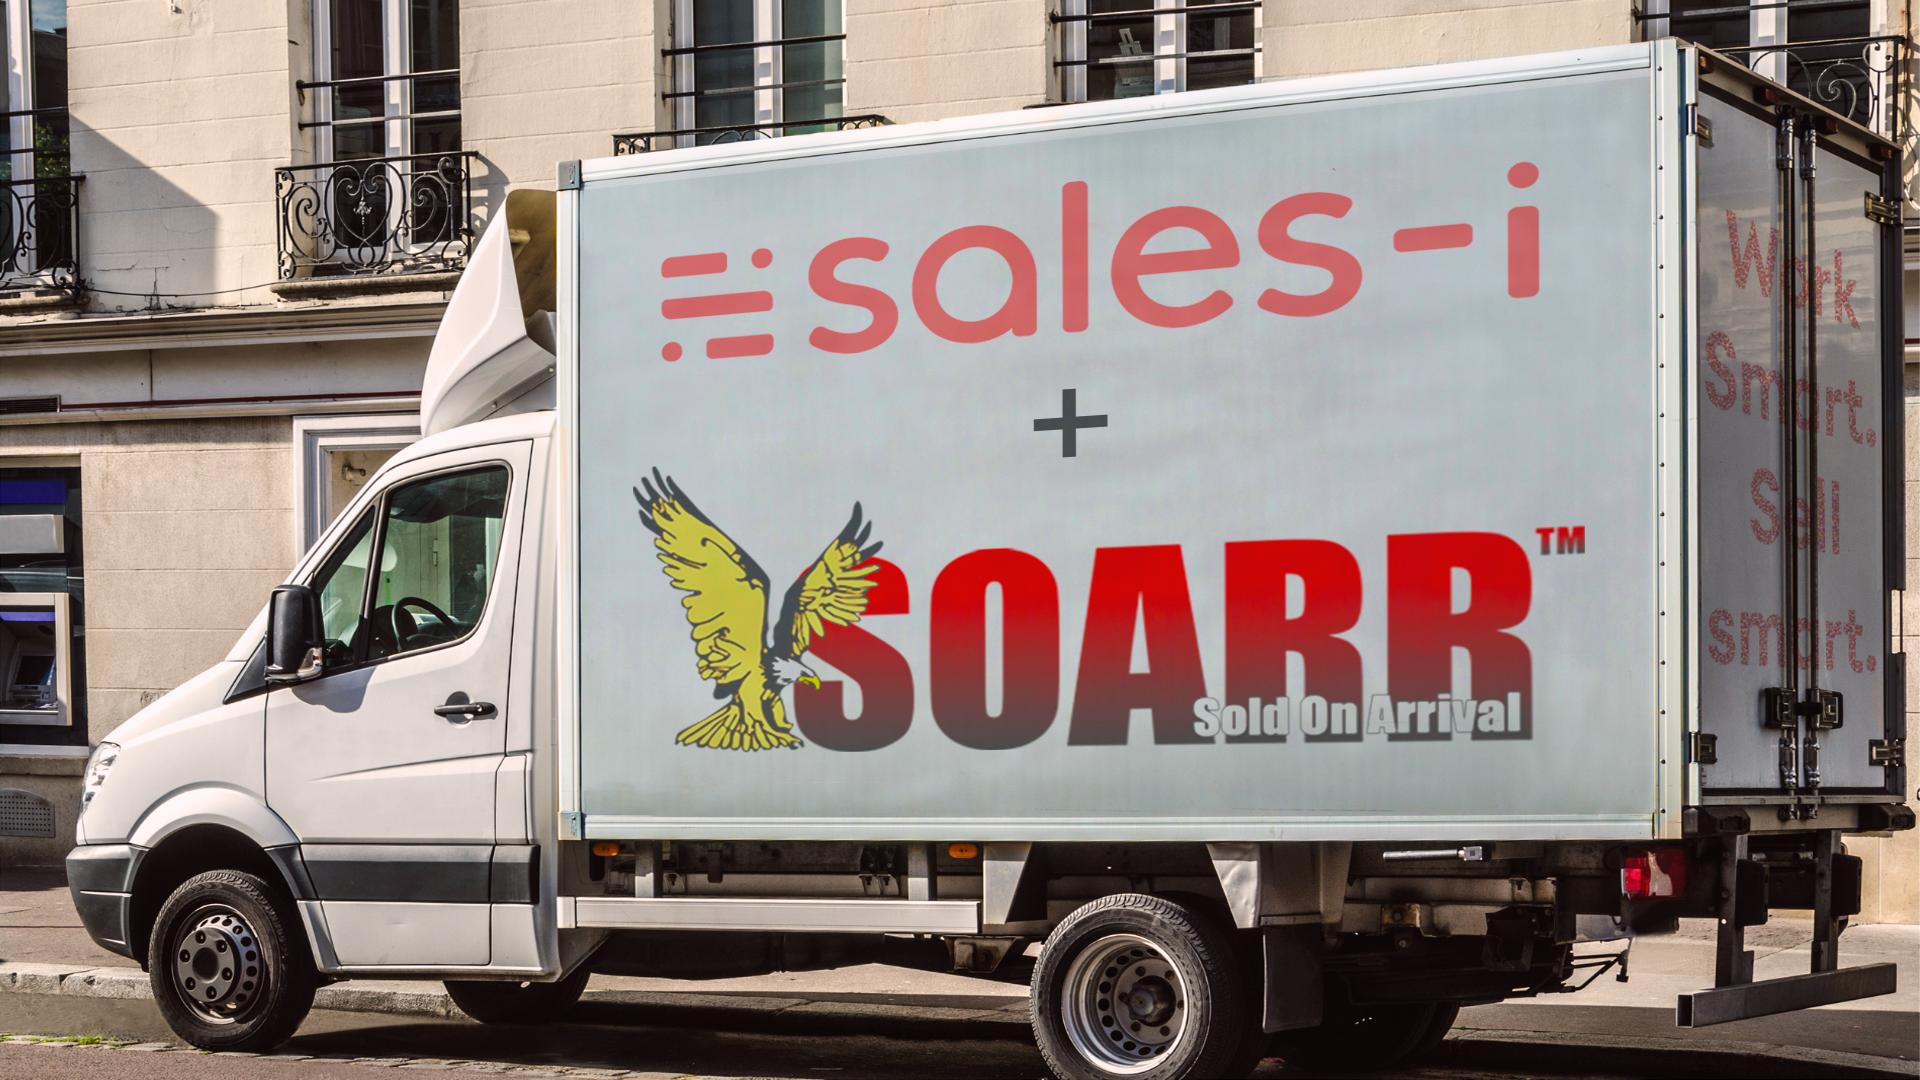 Driving Success Together: sales-i and SOARR Announce New Partnership